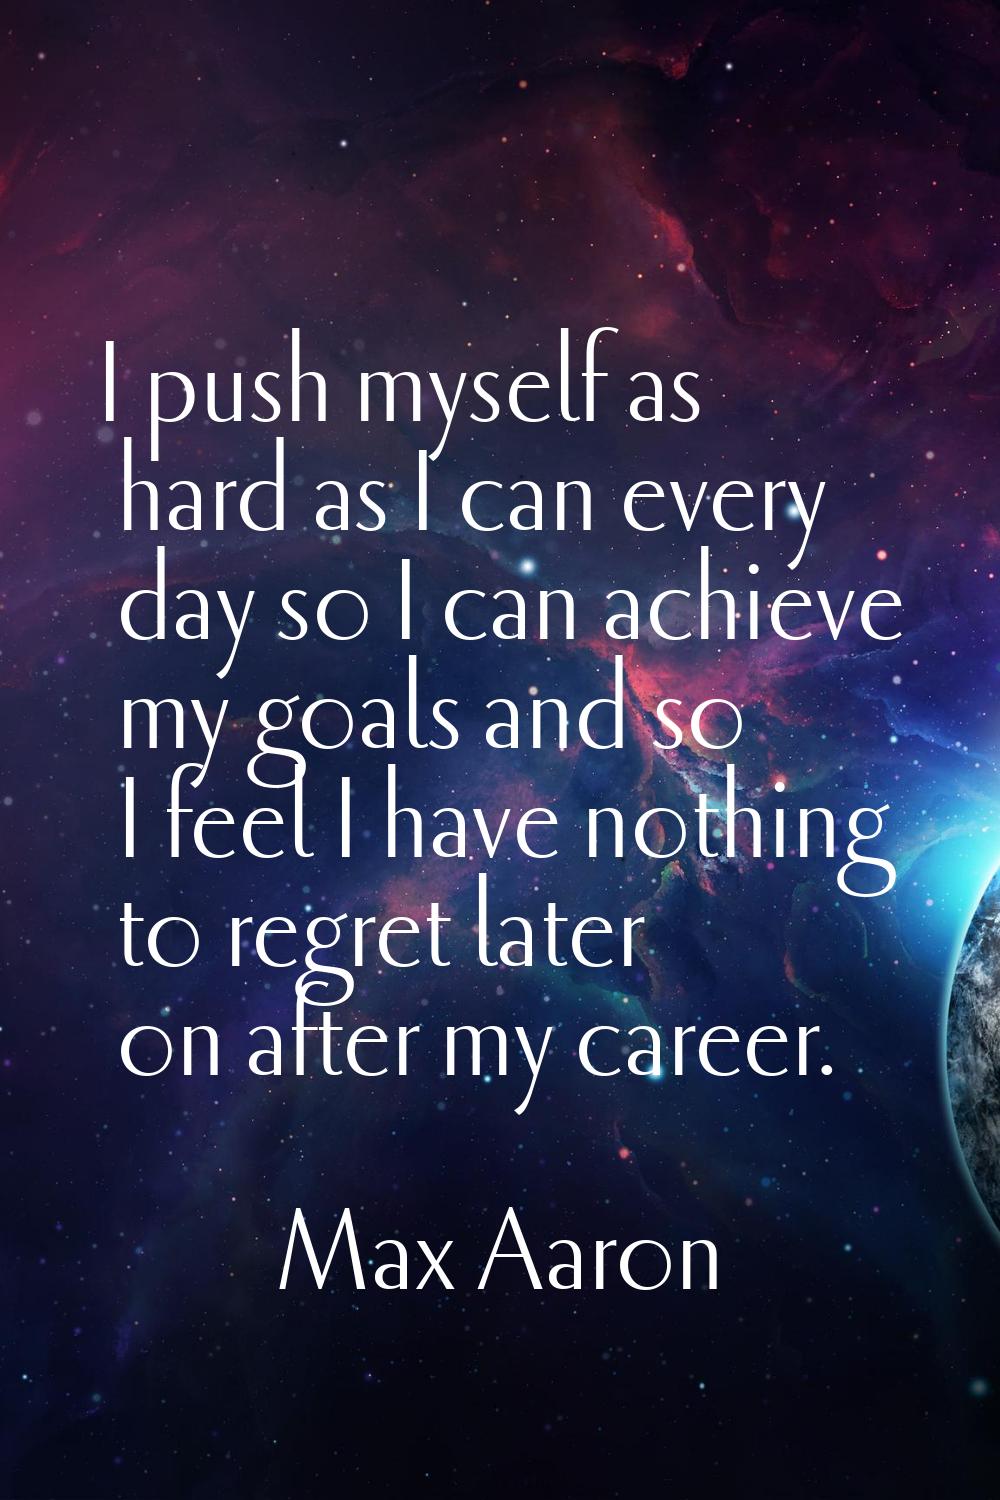 I push myself as hard as I can every day so I can achieve my goals and so I feel I have nothing to 